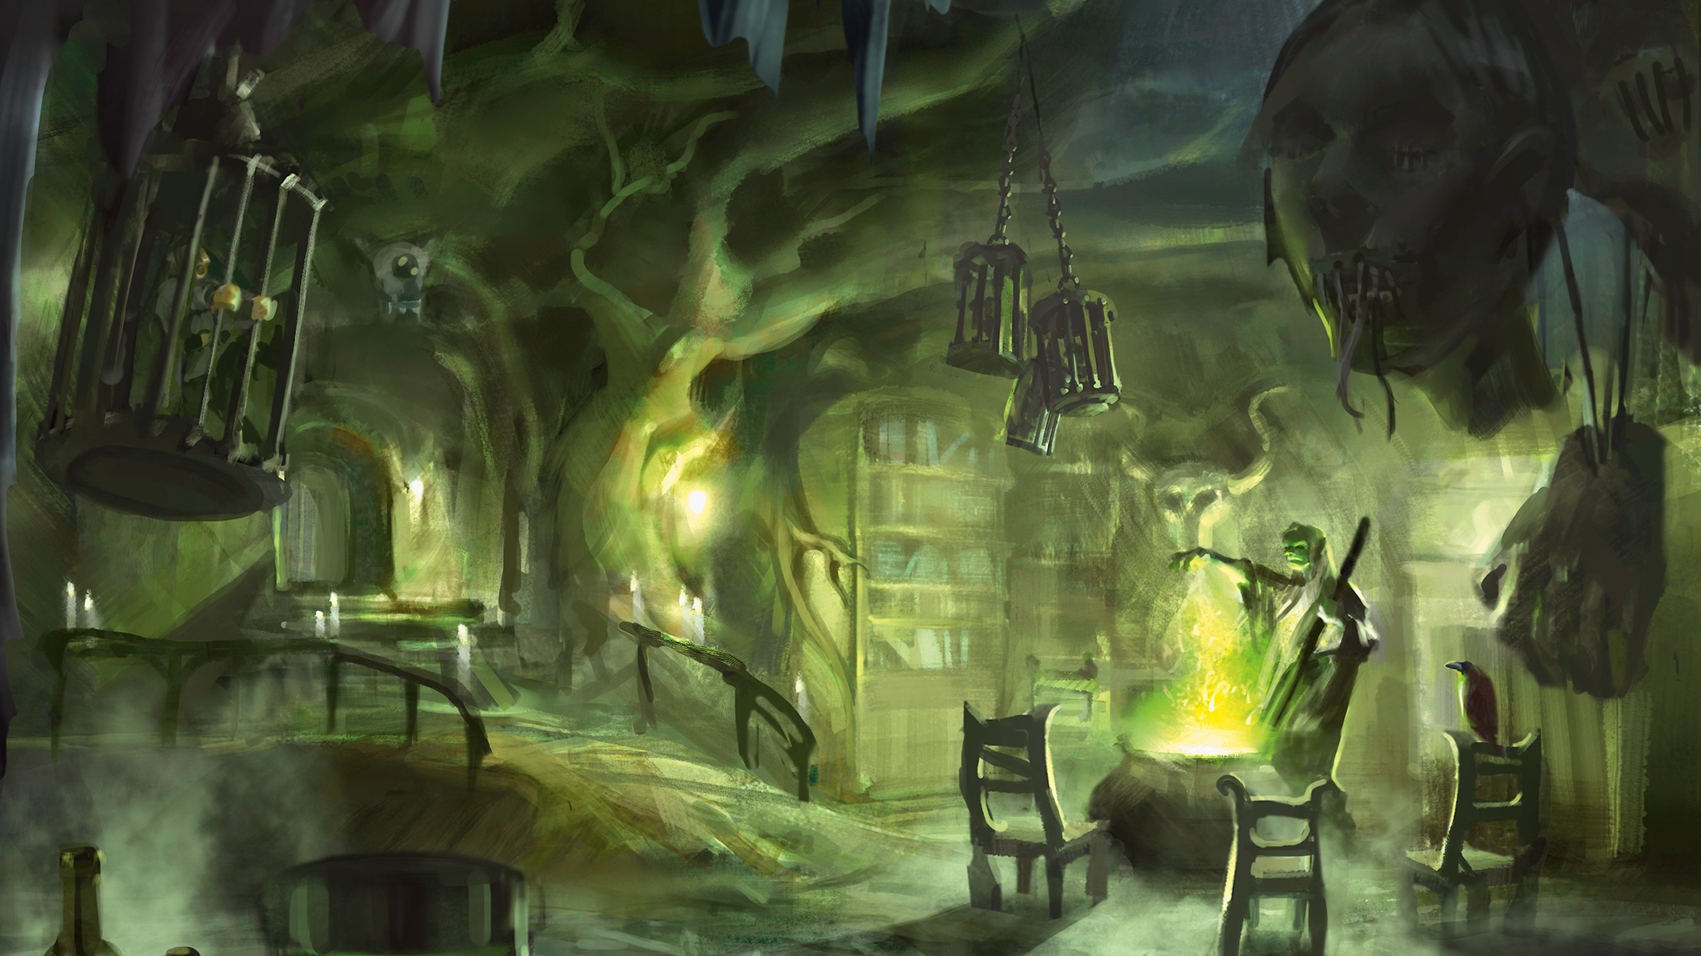 DnD Artificer 5E - Wizards of the Coast art of an Alchemist's lair with ghoulish accessories, and a witch-like character standing before a green cauldron.